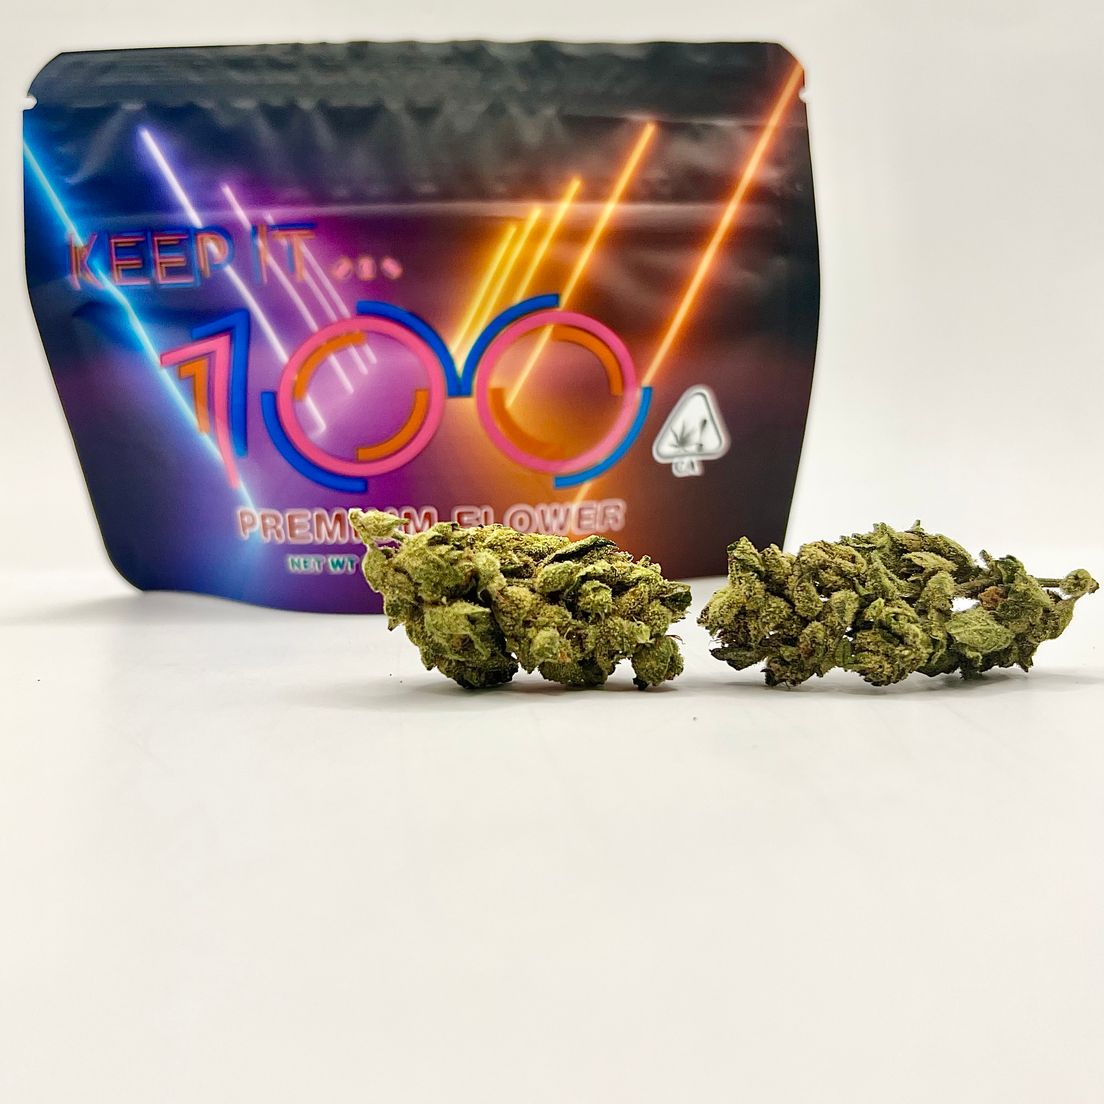 *PRE-ORDER ONLY BLOWOUT DEAL! $25 1/8 White Truffle (28.3%/Hybrid - Indica Dominant) - Keep it 100